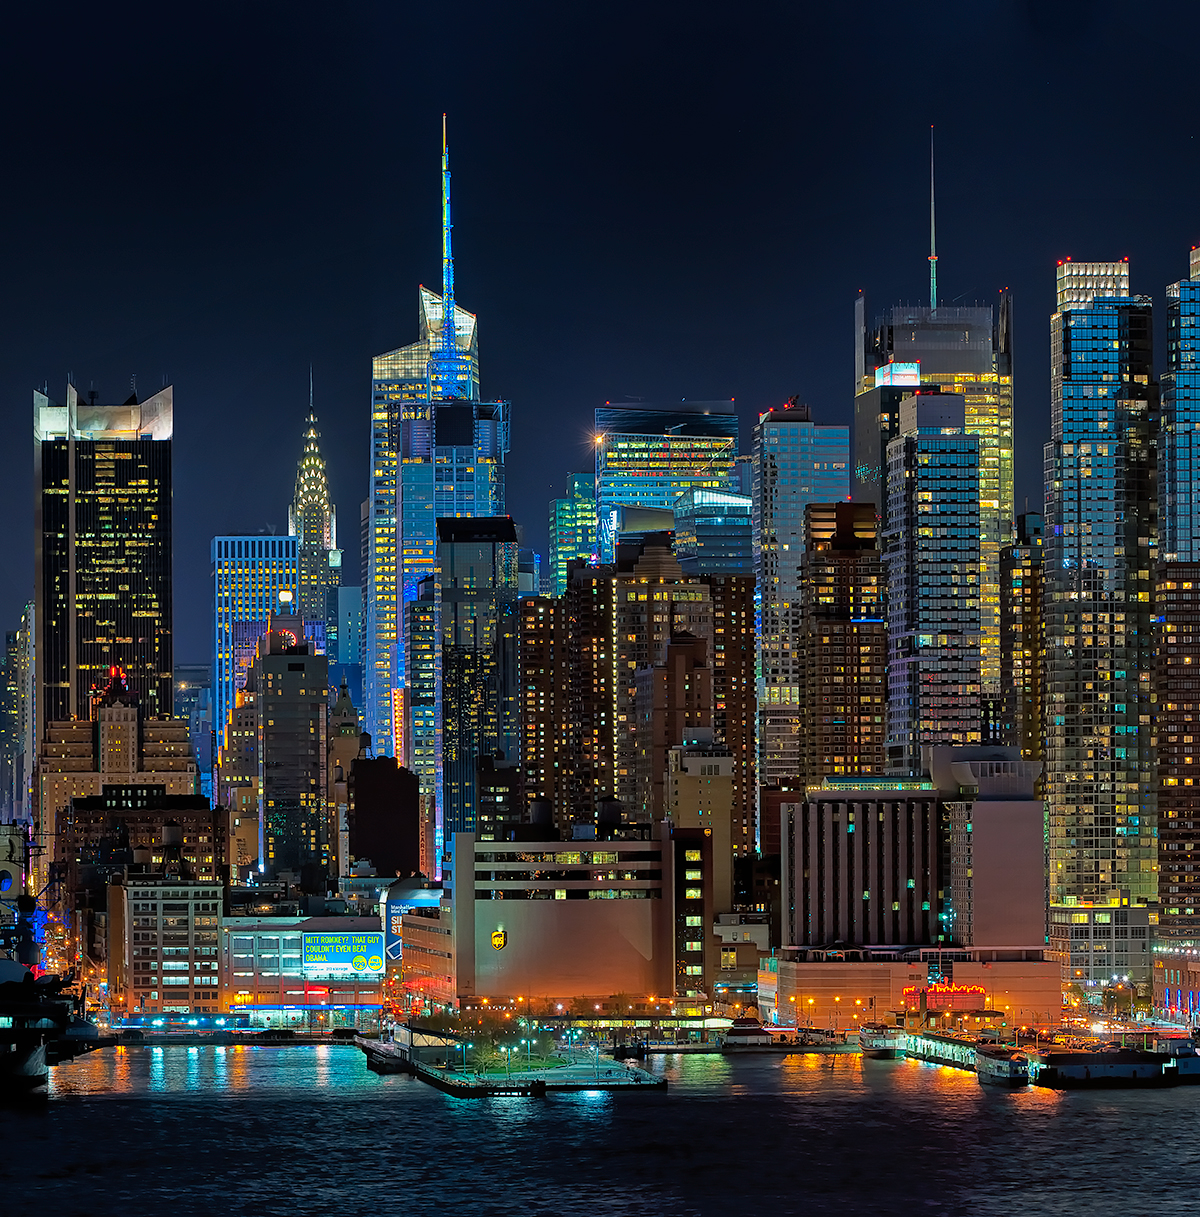 Night panoramic photograph of the Manhattan Skyline with a full moon rising available as a fine art print, canvas gallery wrap or for licensed use